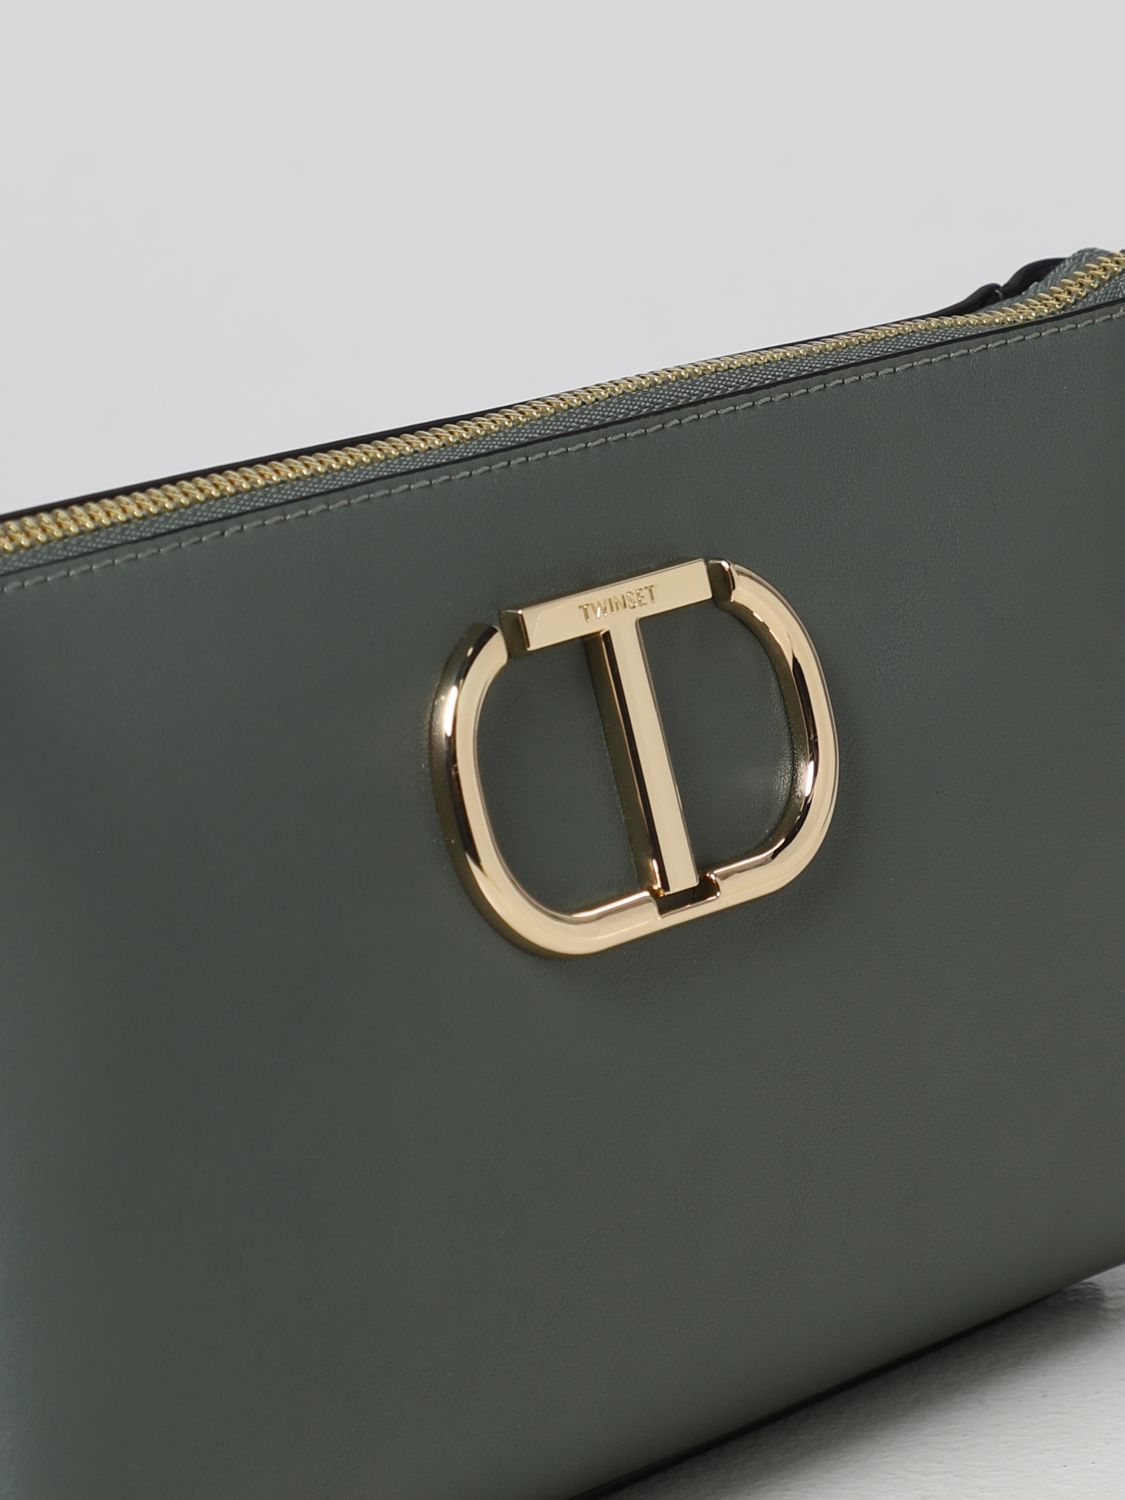 TWINSET: crossbody bags for woman - Green  Twinset crossbody bags  222TB7431 online at